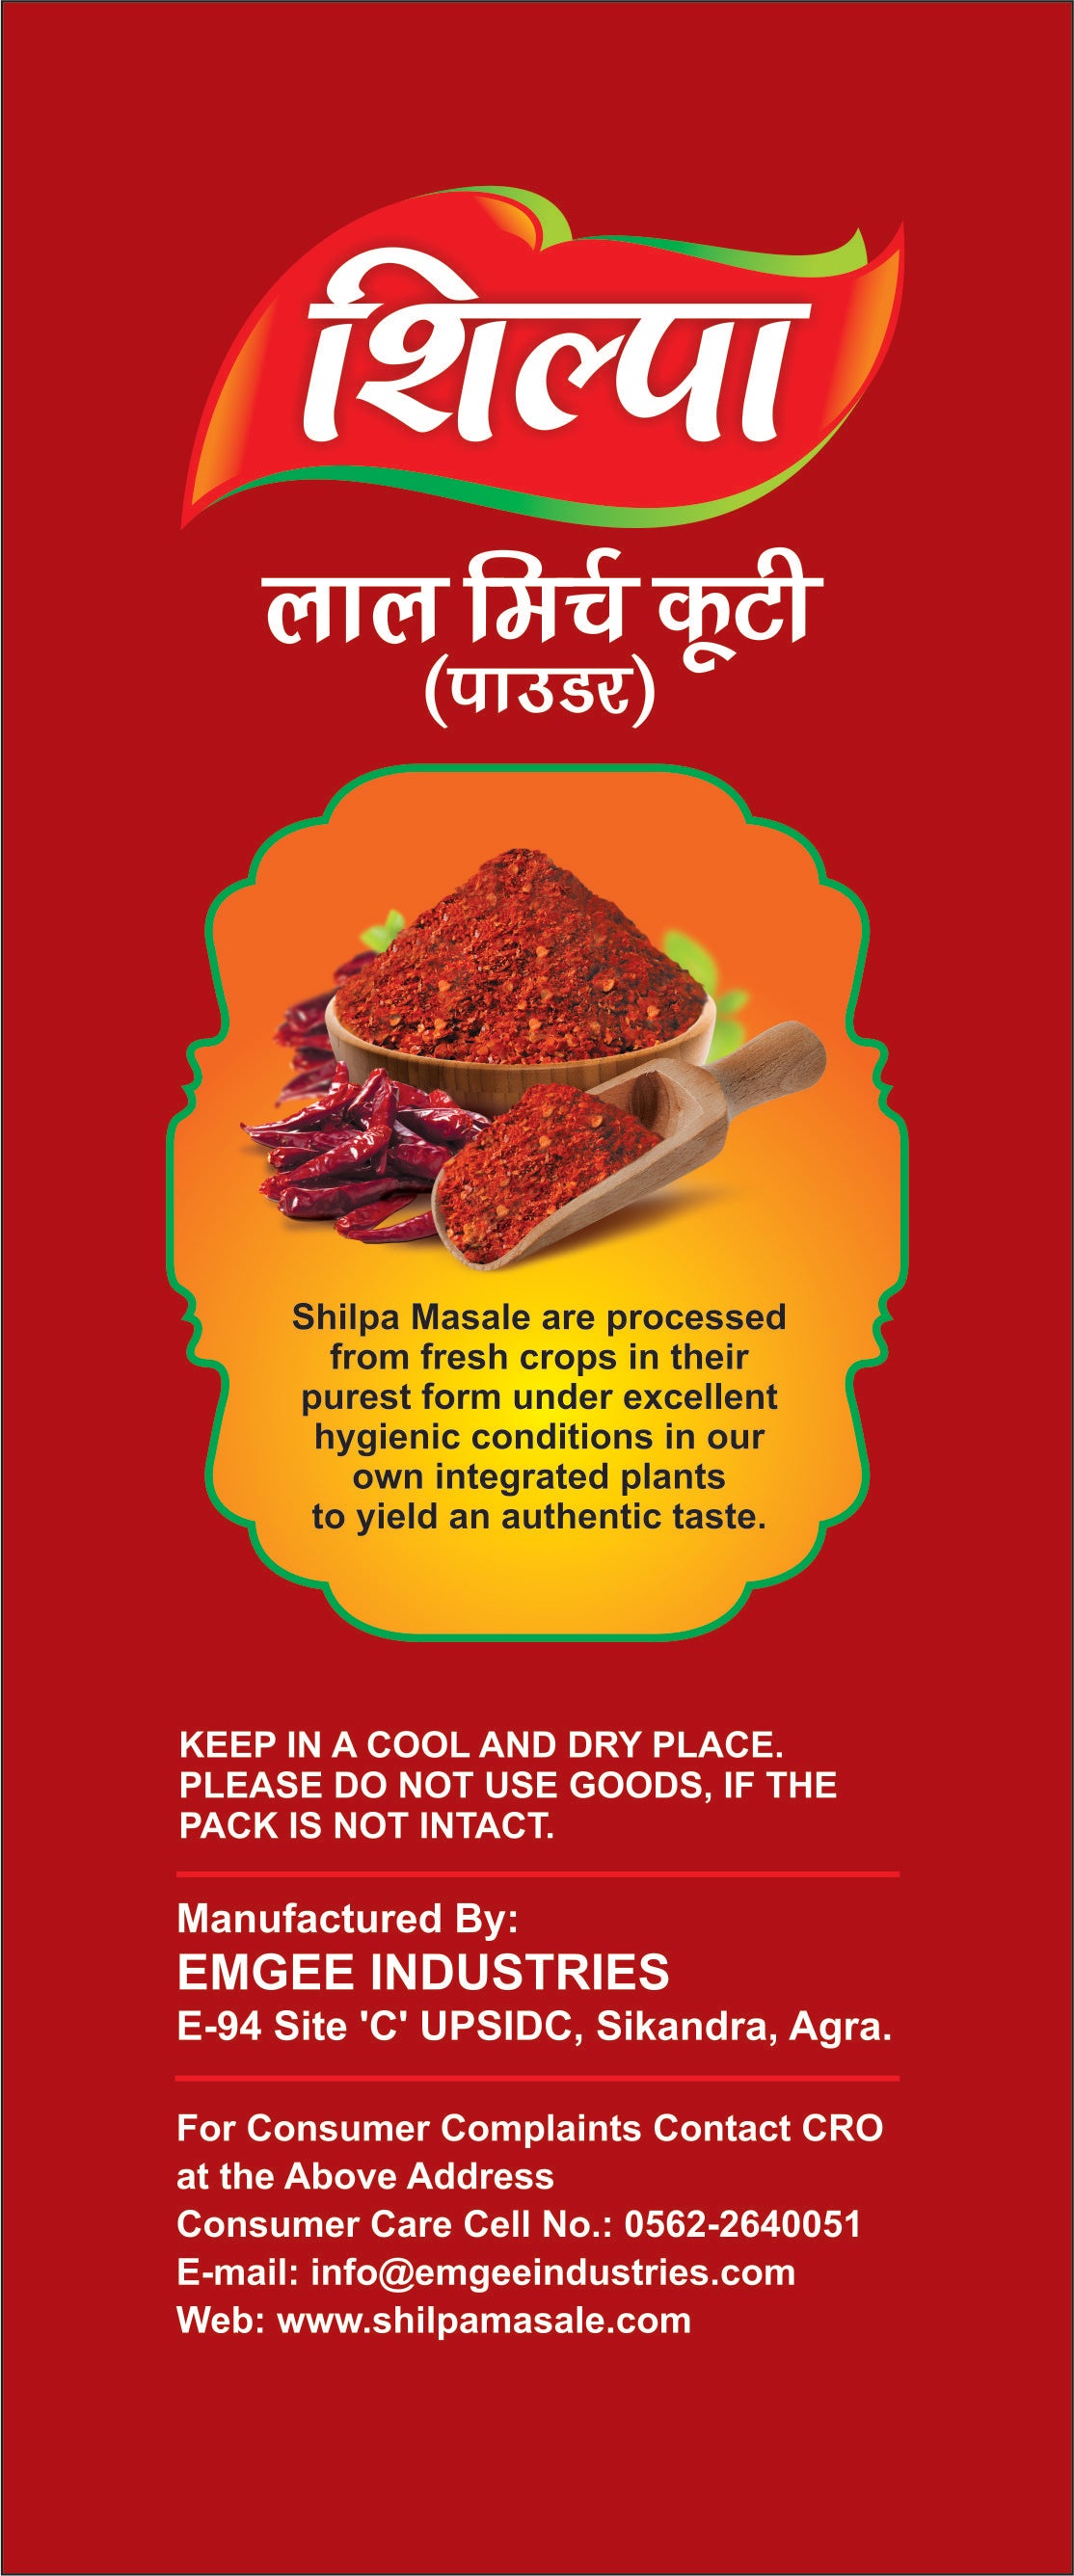 Shilpa Masale Kuti Lal Mirch (Crushed Red Chilli) Powder Spices 200g Pouch